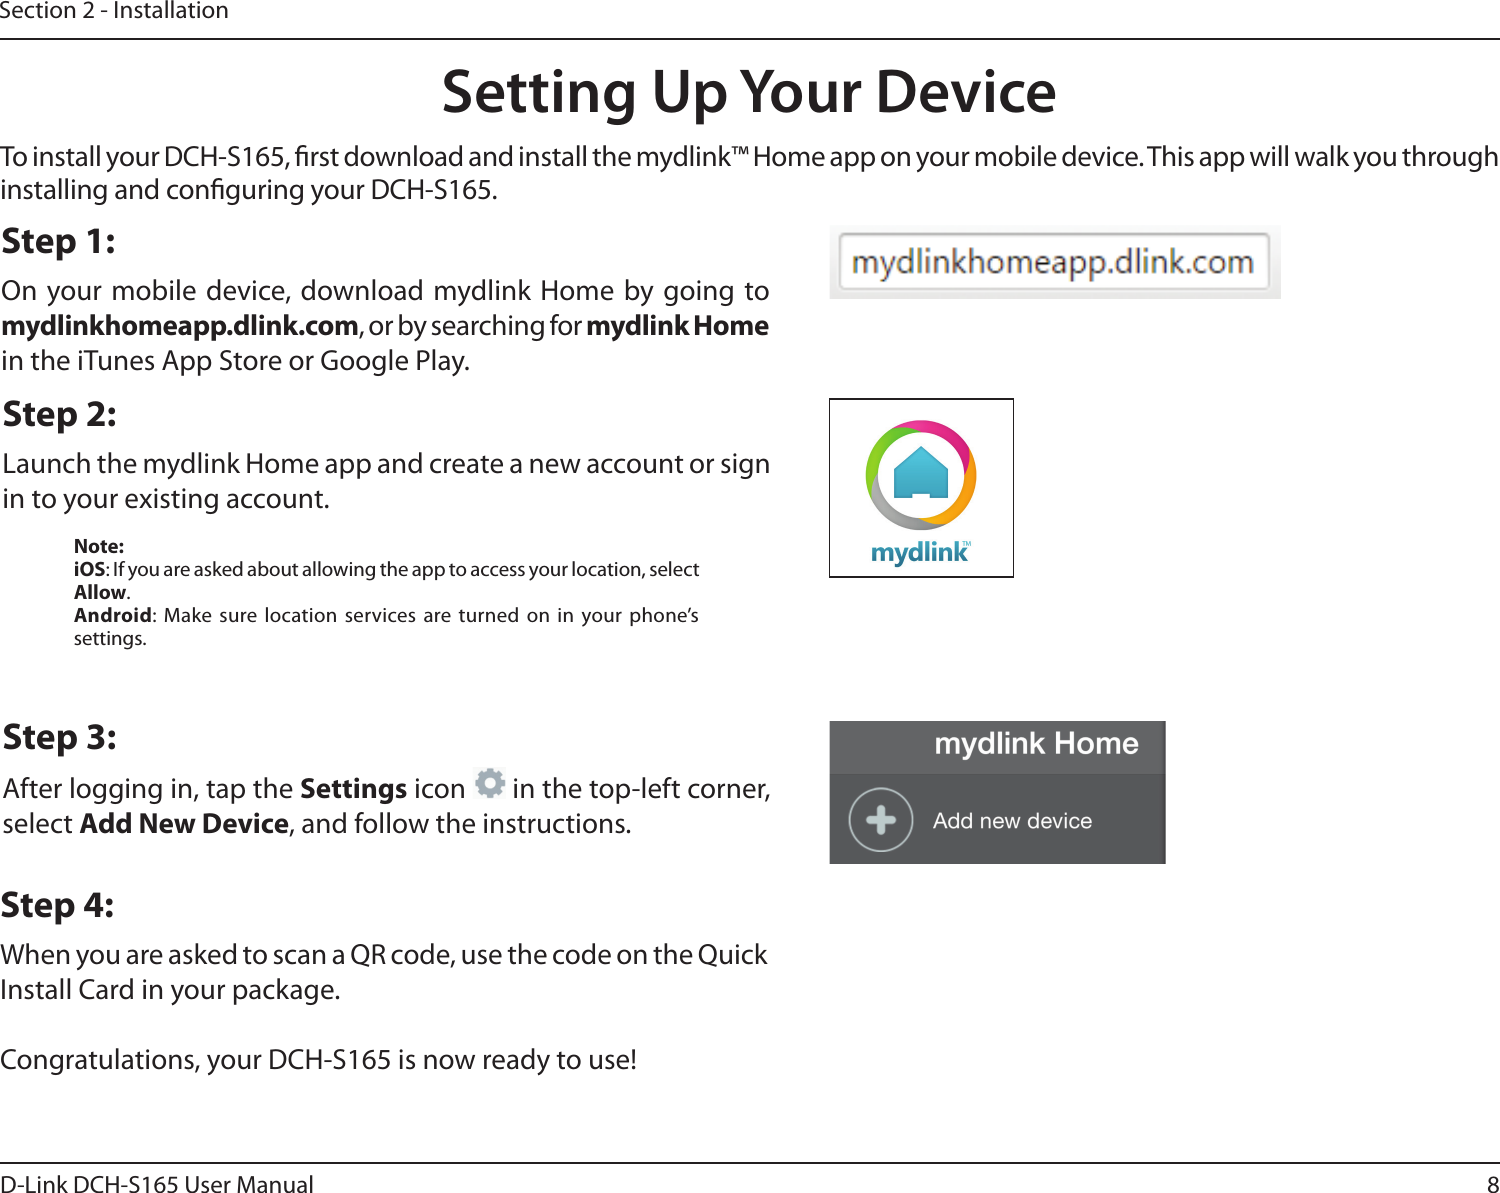 8D-Link DCH-S165 User ManualSection 2 - InstallationTo install your DCH-S165, rst download and install the mydlink™ Home app on your mobile device. This app will walk you through installing and conguring your DCH-S165.Step 2:Launch the mydlink Home app and create a new account or sign in to your existing account.Step 1:On your mobile device, download mydlink Home by going to mydlinkhomeapp.dlink.com, or by searching for mydlink Home in the iTunes App Store or Google Play.Step 3:After logging in, tap the Settings icon   in the top-left corner, select Add New Device, and follow the instructions.Step 4:When you are asked to scan a QR code, use the code on the Quick Install Card in your package.Congratulations, your DCH-S165 is now ready to use!Setting Up Your DeviceNote:iOS: If you are asked about allowing the app to access your location, select Allow.Android: Make sure location services are turned on in your phone’s settings.